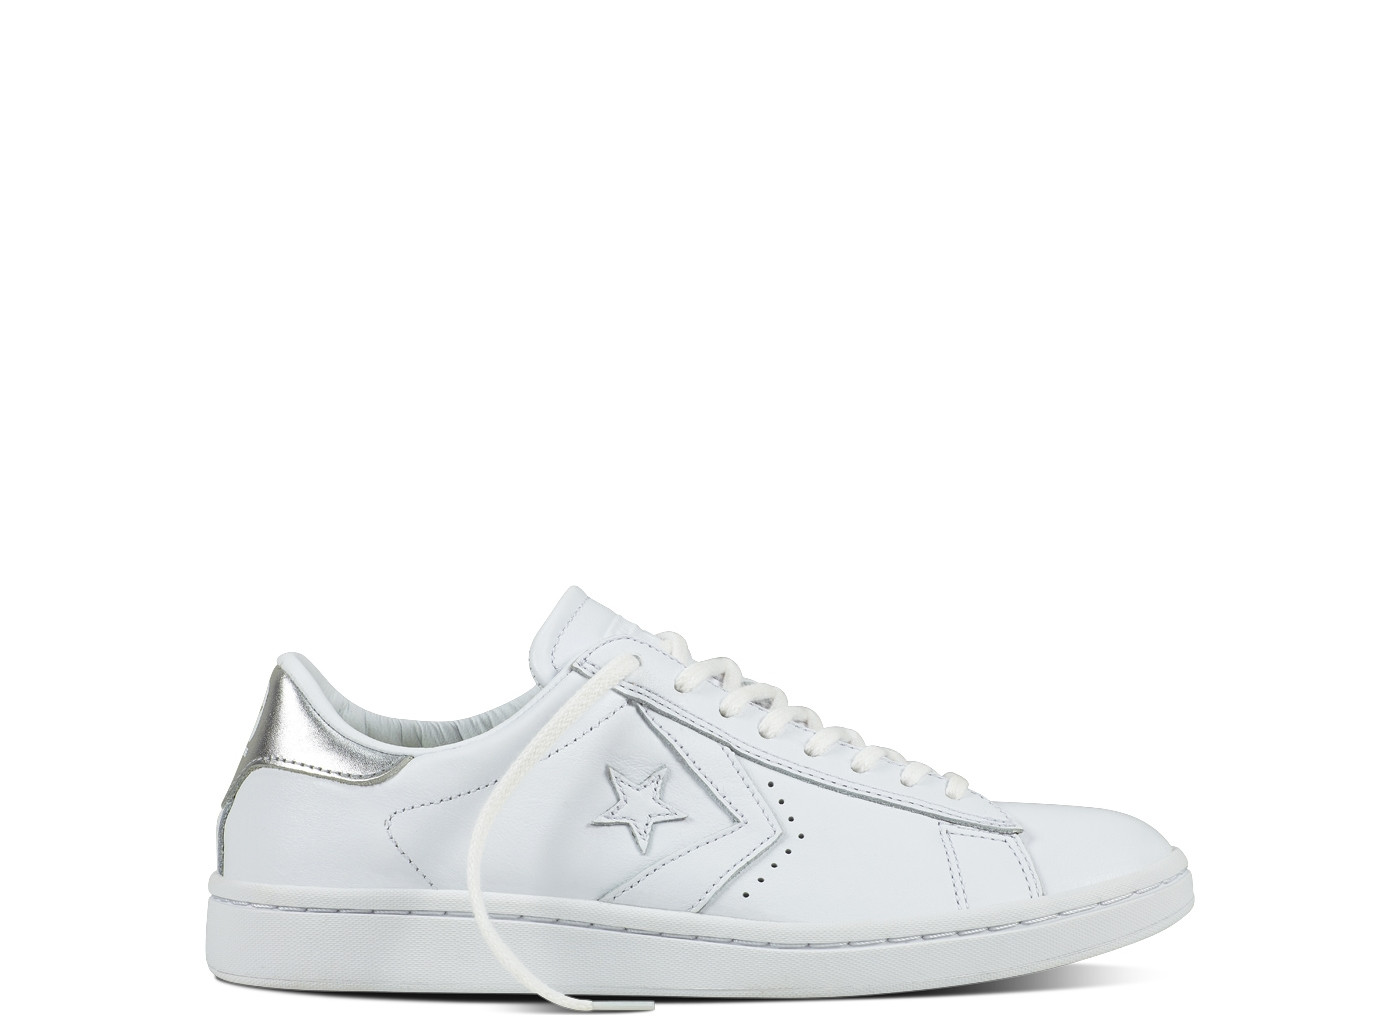 converse one star argent